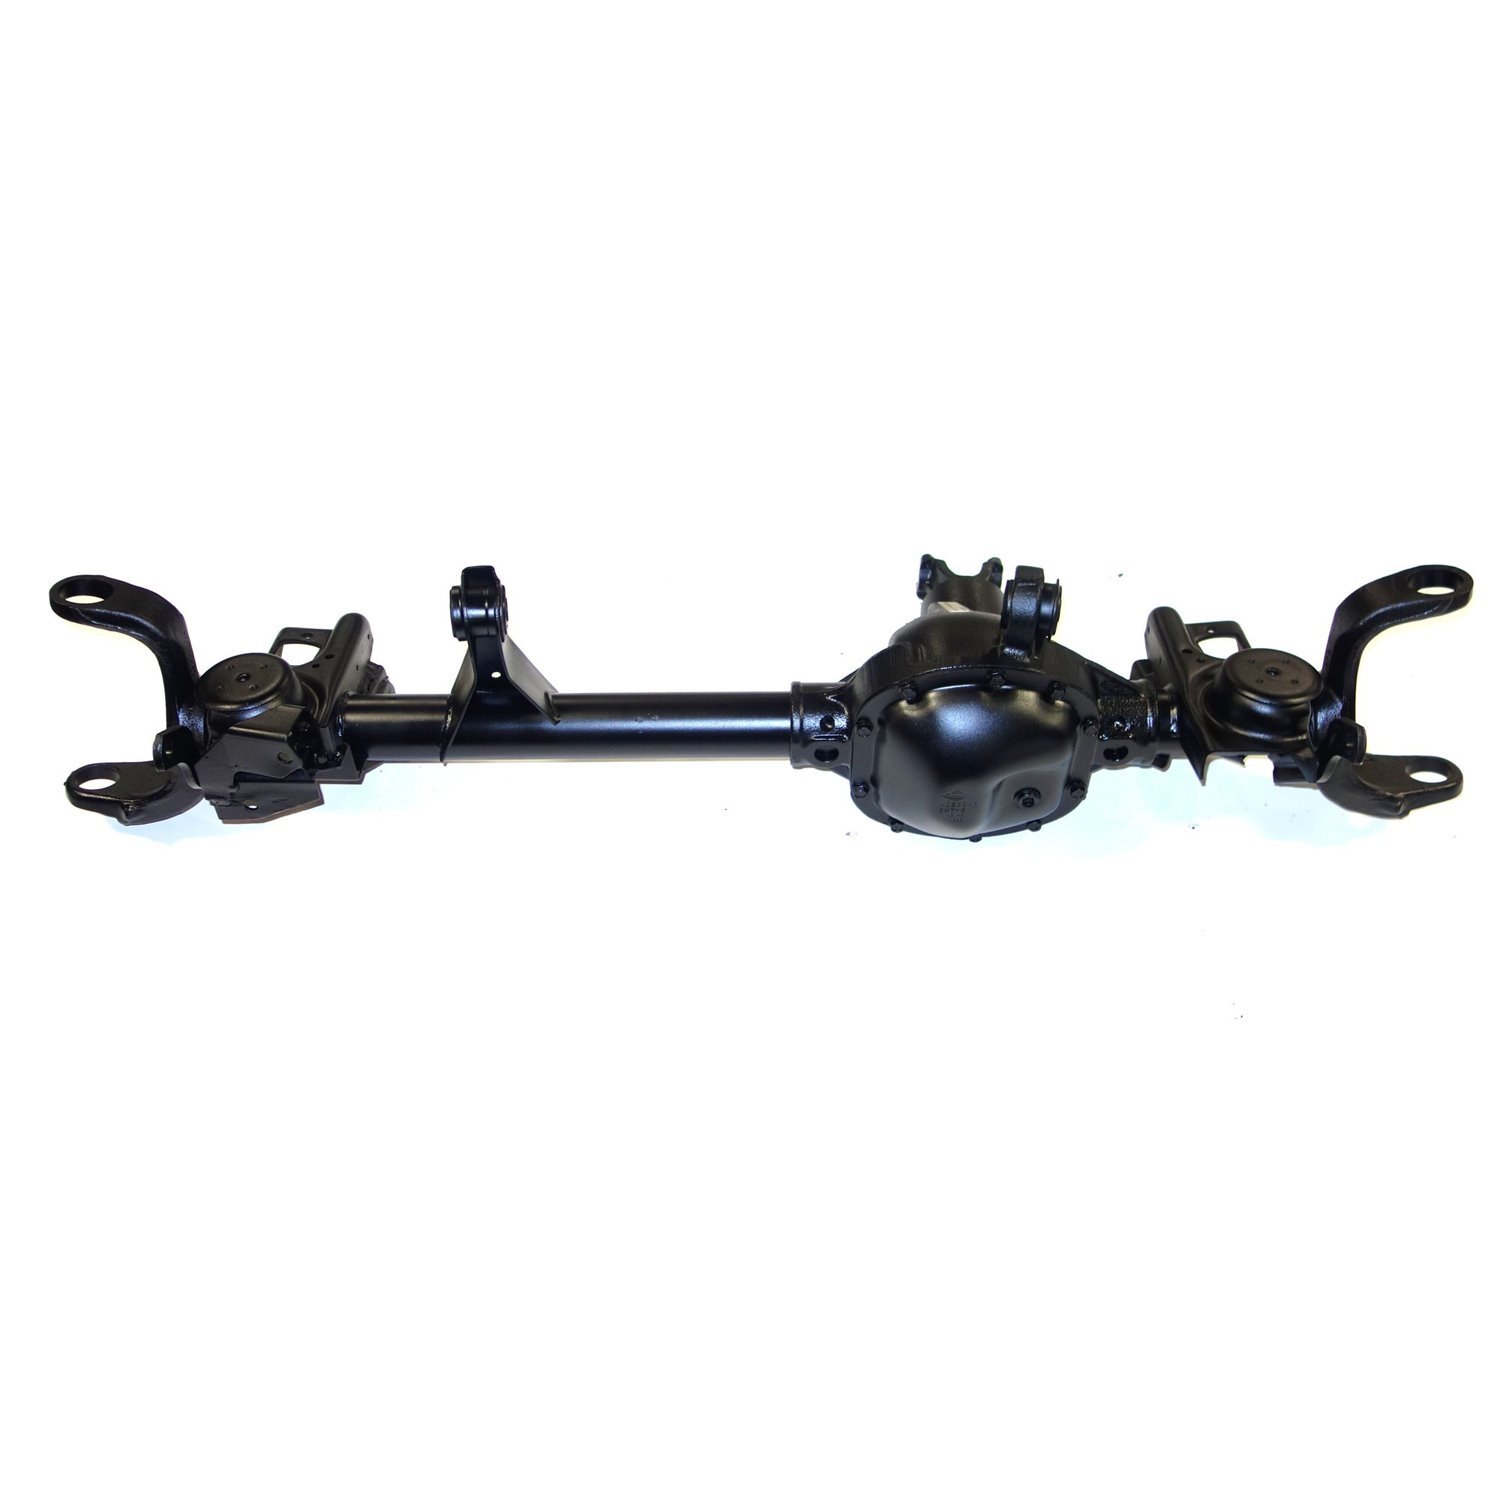 Remanufactured Complete Axle Assembly for Dana 30 94-99 Jeep Cherokee 4.11 Ratio with ABS